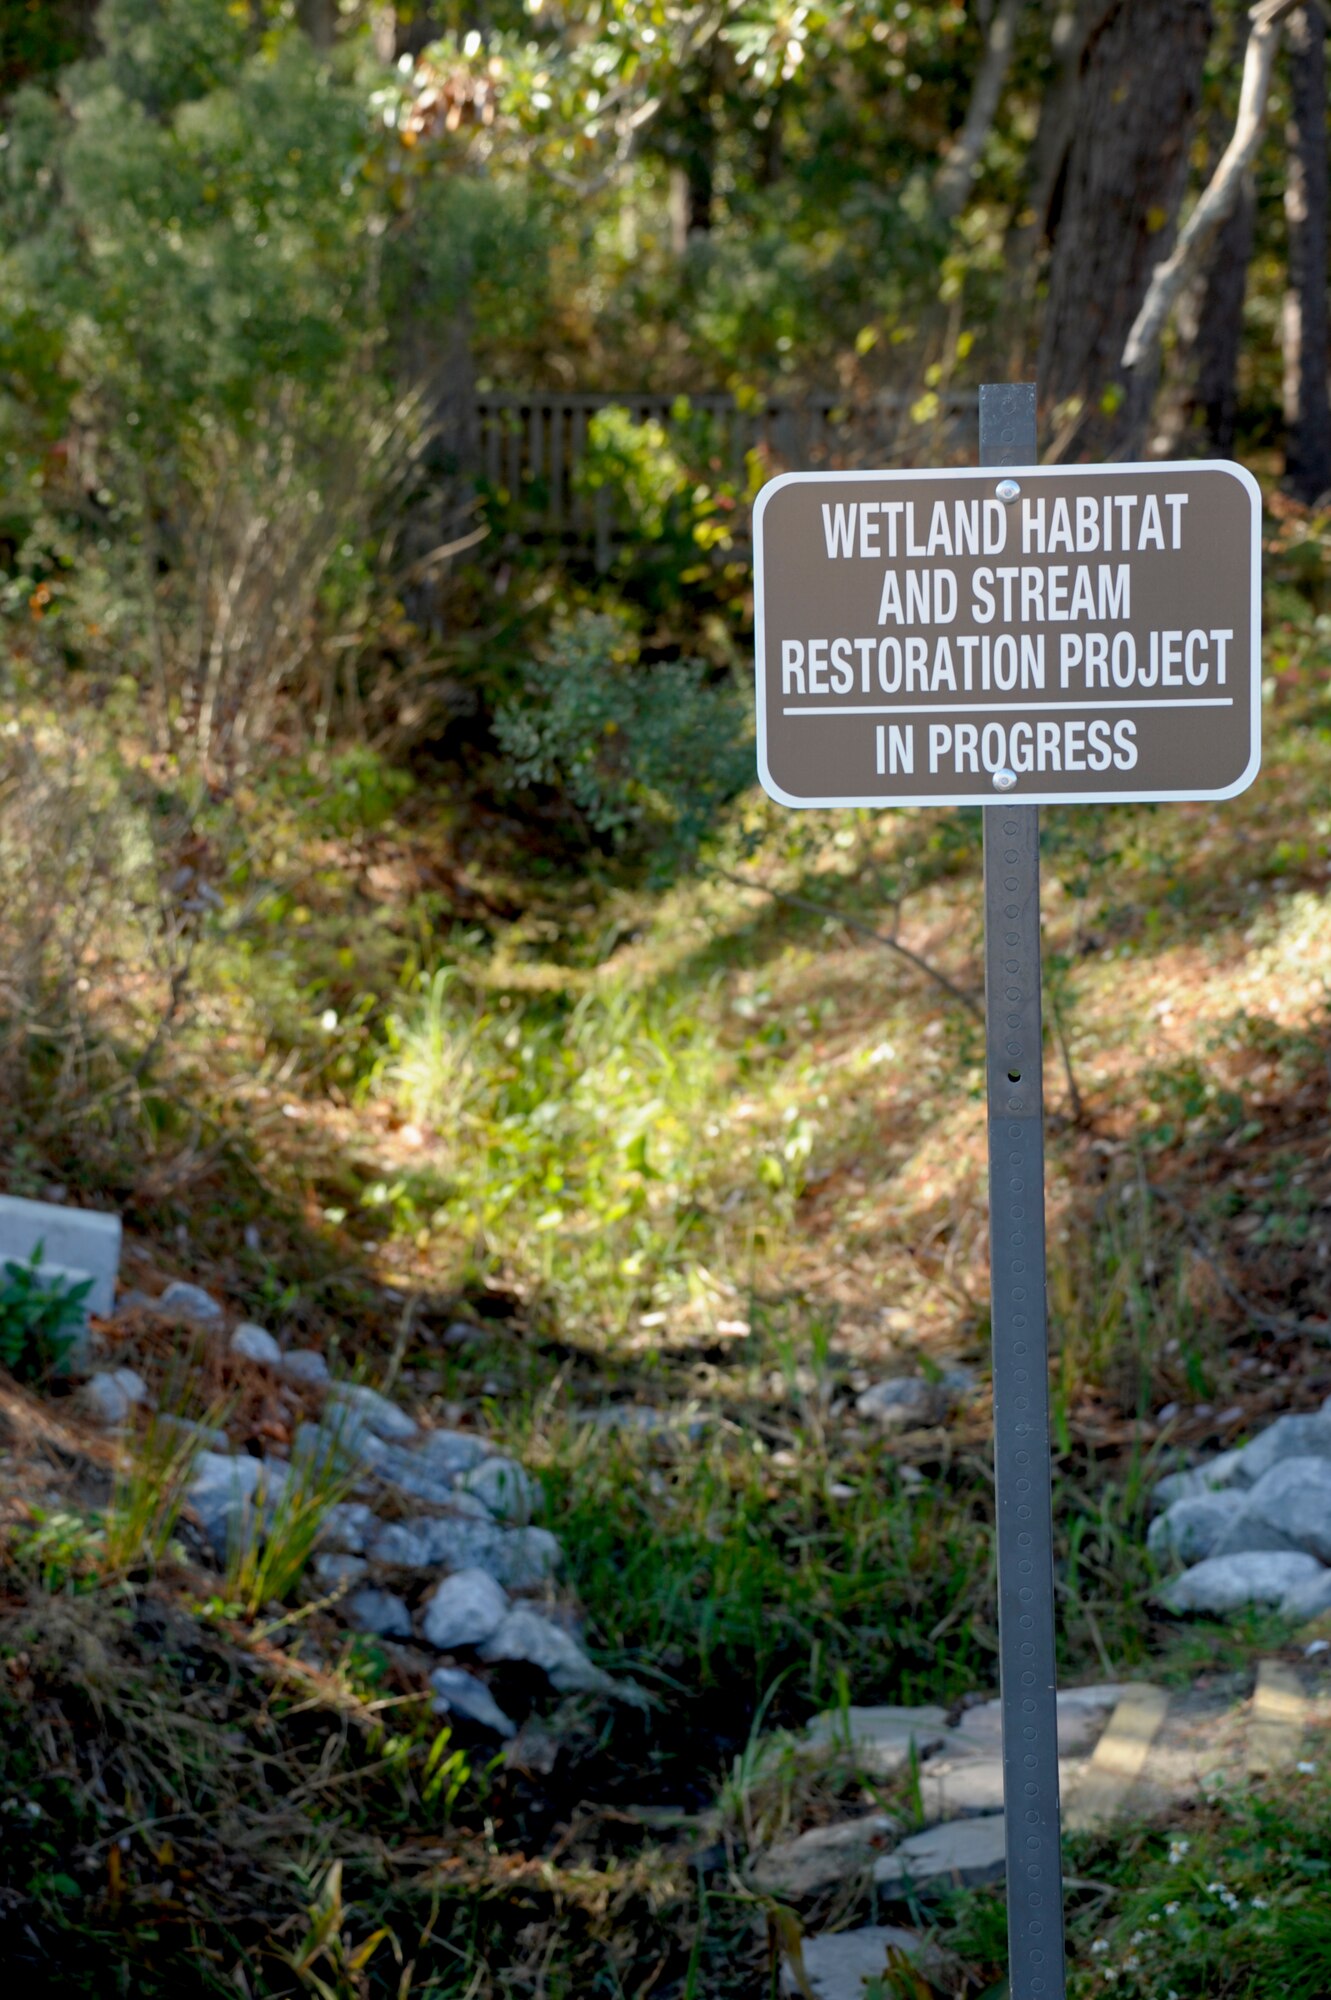 A sign is posted to indicate the Hurlburt Field Youth Center Wetland Stream Project, at Hurlburt Field, Fla., Nov. 28, 2012.  The purpose of the ongoing project is to restore streams to strengthen the ecosystem for plants and wildlife, and in turn, yield educational, volunteer and recreational activities for children and Airmen of Hurlburt Field.  (U.S. Air Force Photo / Airman 1st Class Benjamin D. Kim)